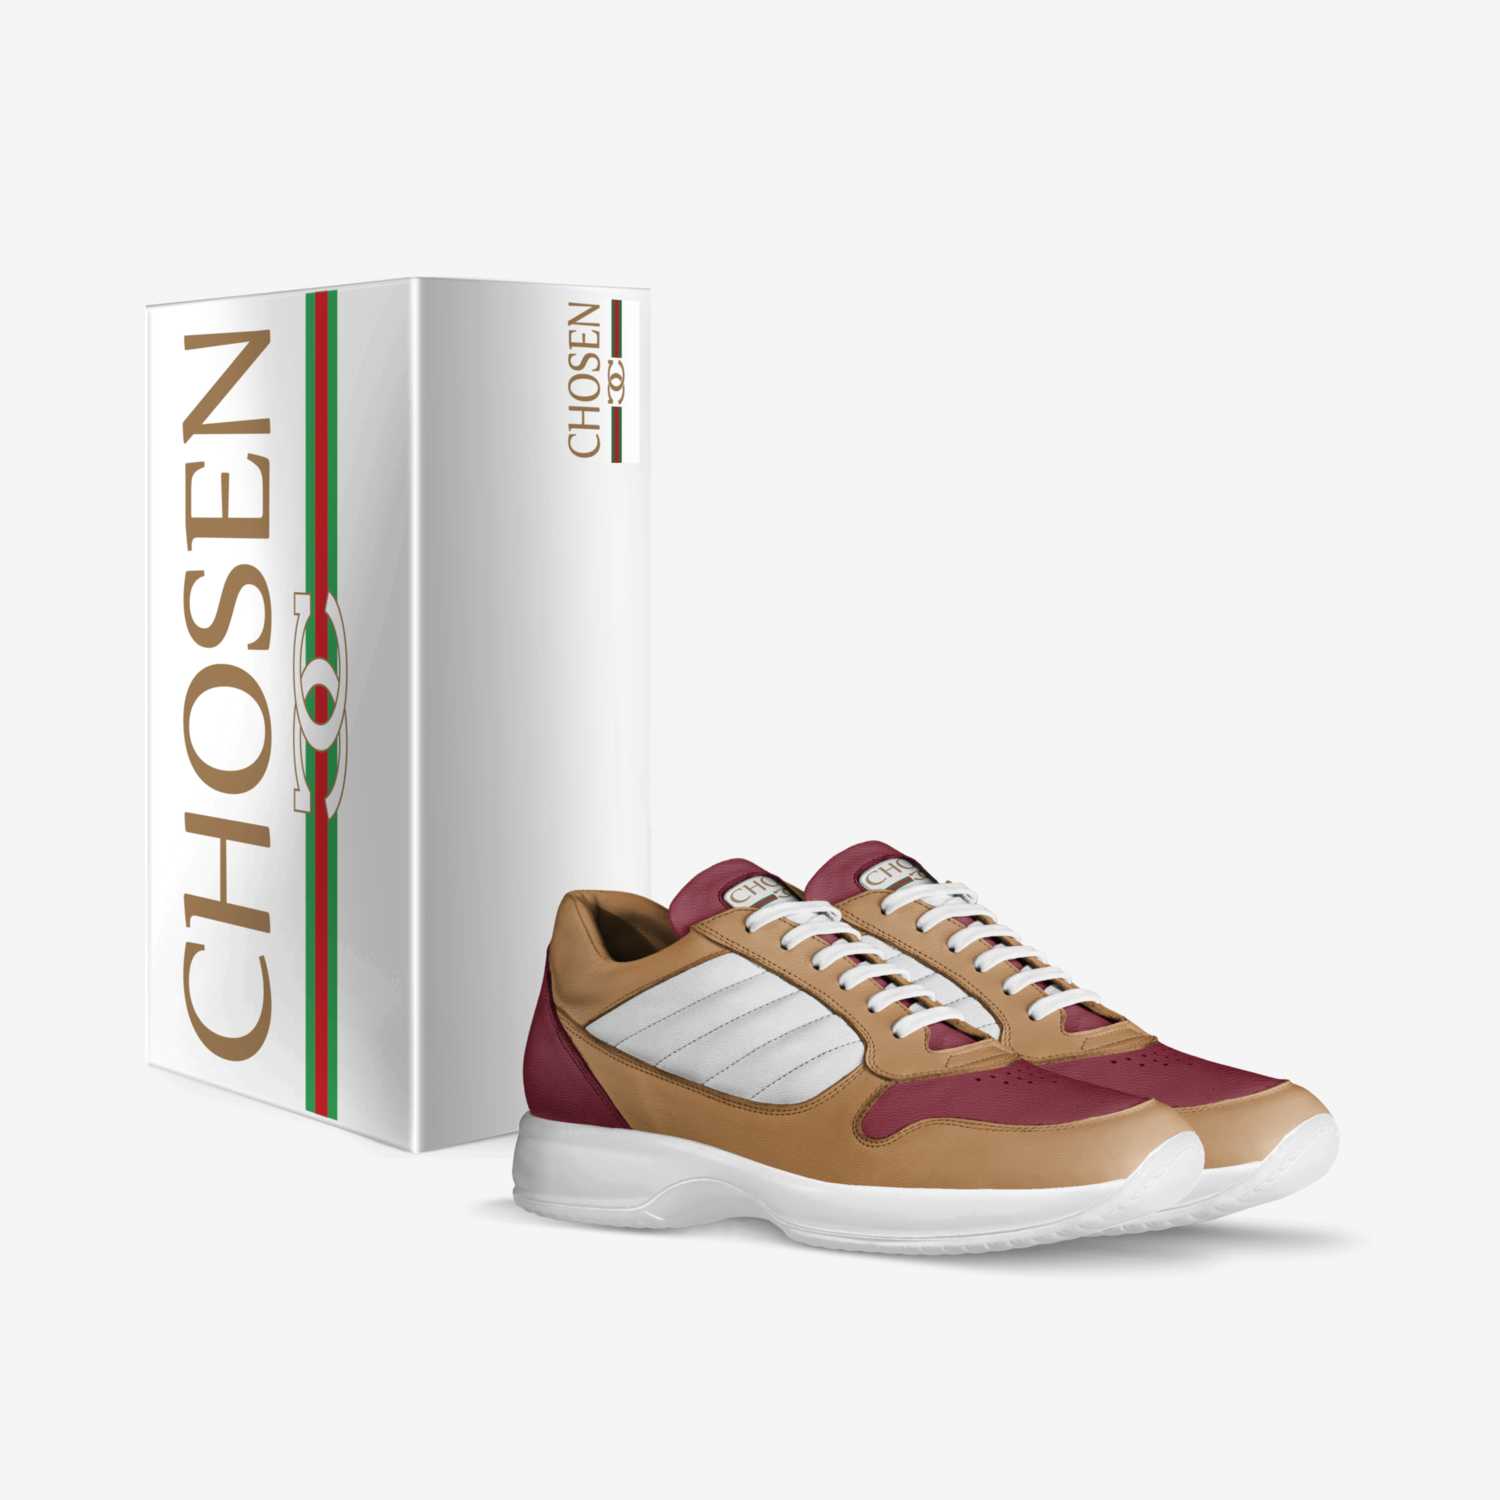 Chosen Sneaks custom made in Italy shoes by B Lawson | Box view